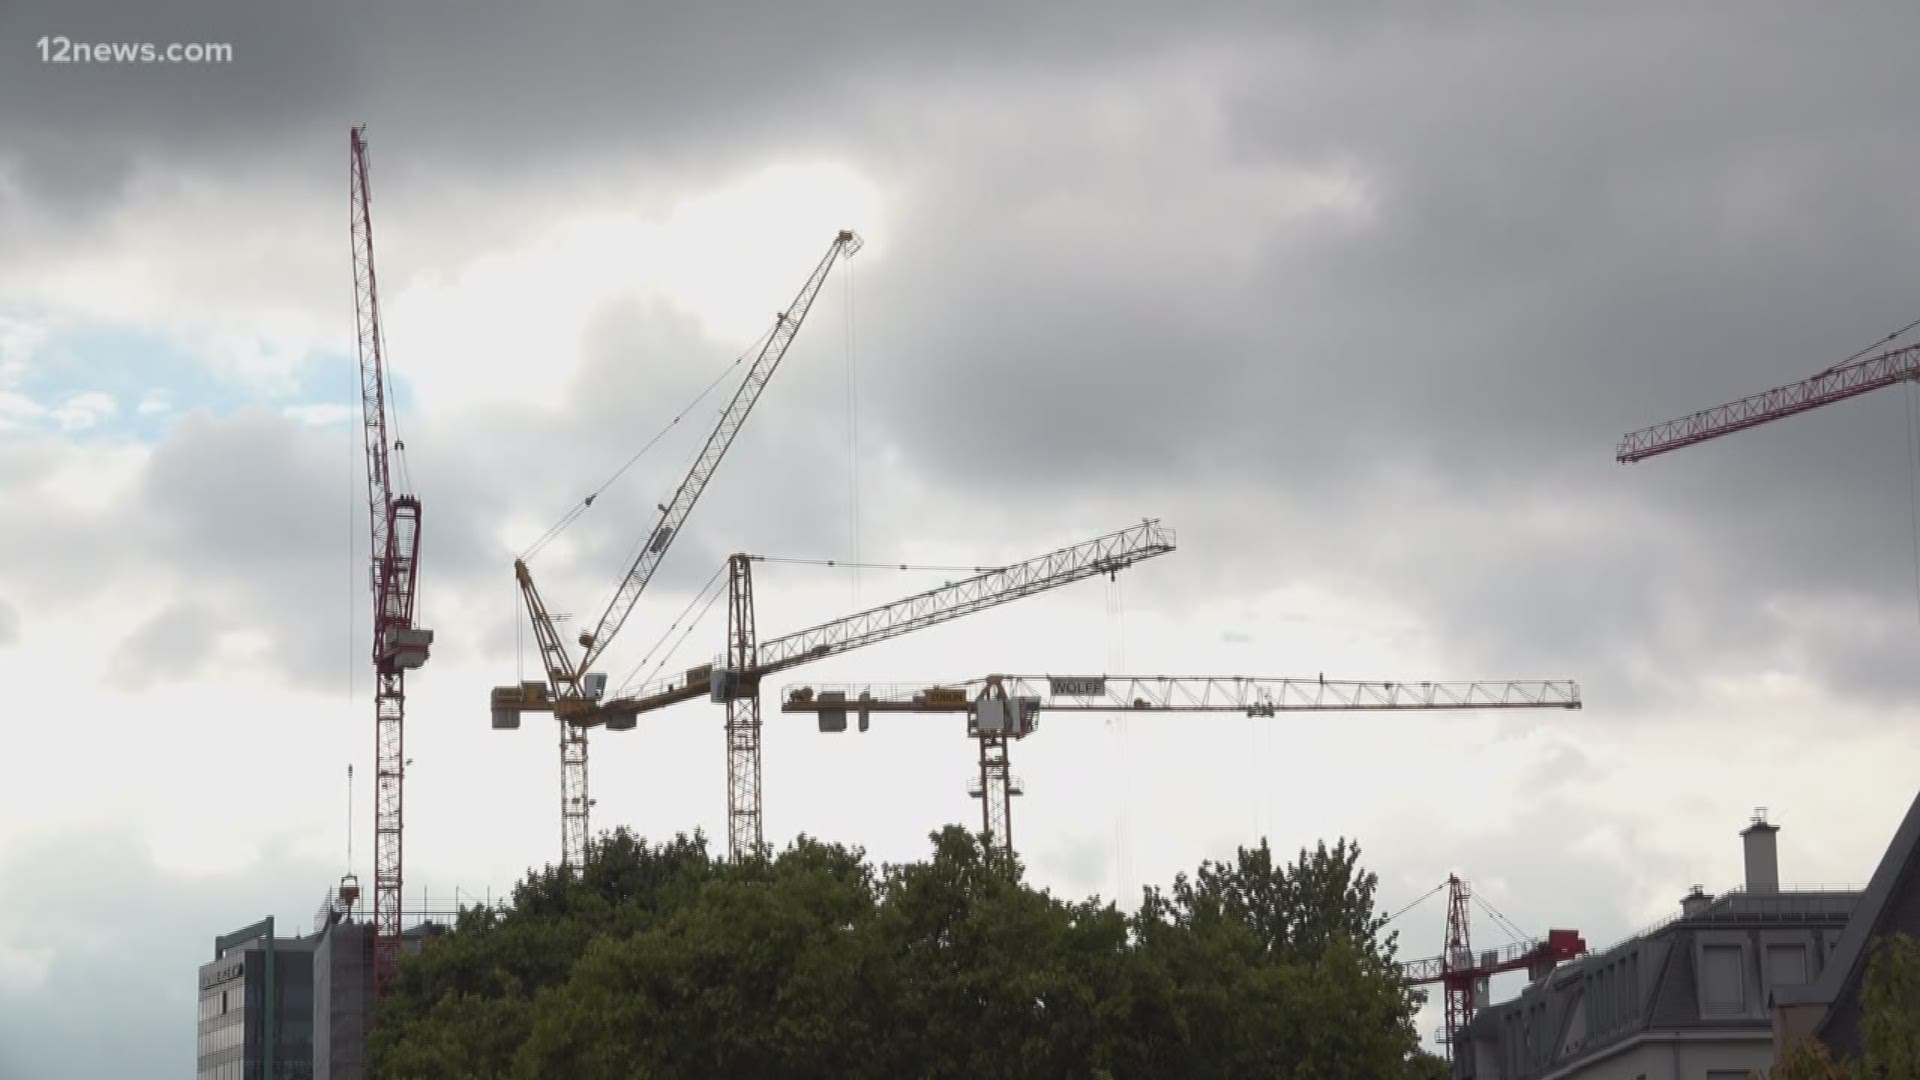 Over the weekend a construction crane crashed into an apartment sky rise in Dallas. The crash killed one person and left dozens hurt. With Phoenix's skyline filling up with similar construction cranes we asked how safe they are during a monsoon storm.